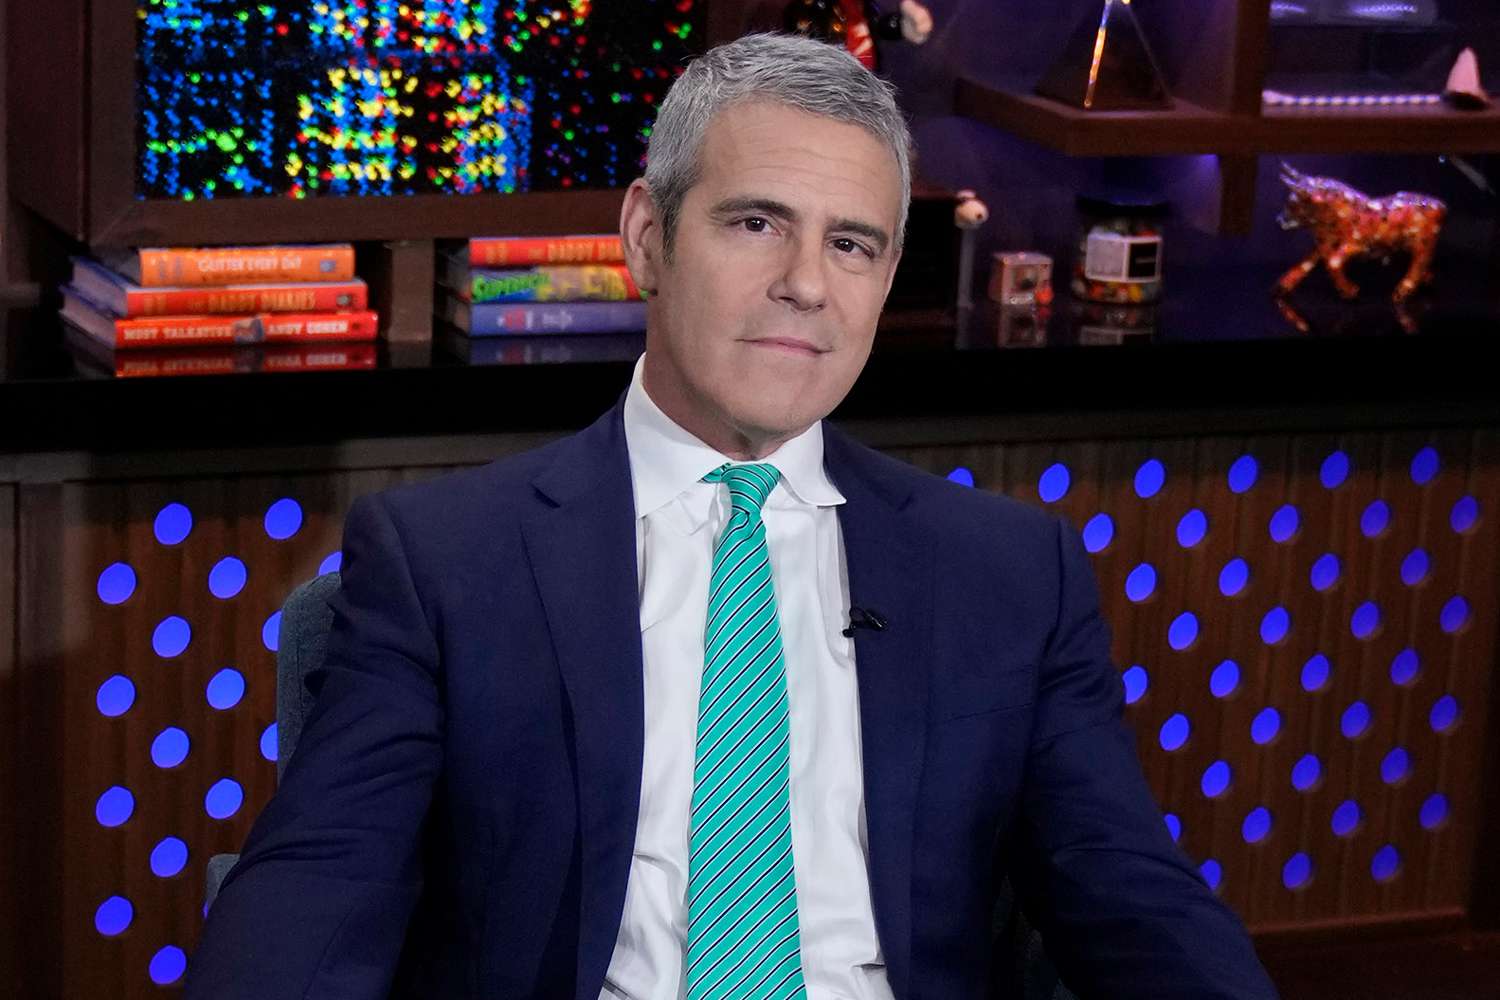 Andy Cohen Opens Up About Fears of Getting Canceled, ‘Sustained Attack’ by Bethenny Frankel and Other Housewives